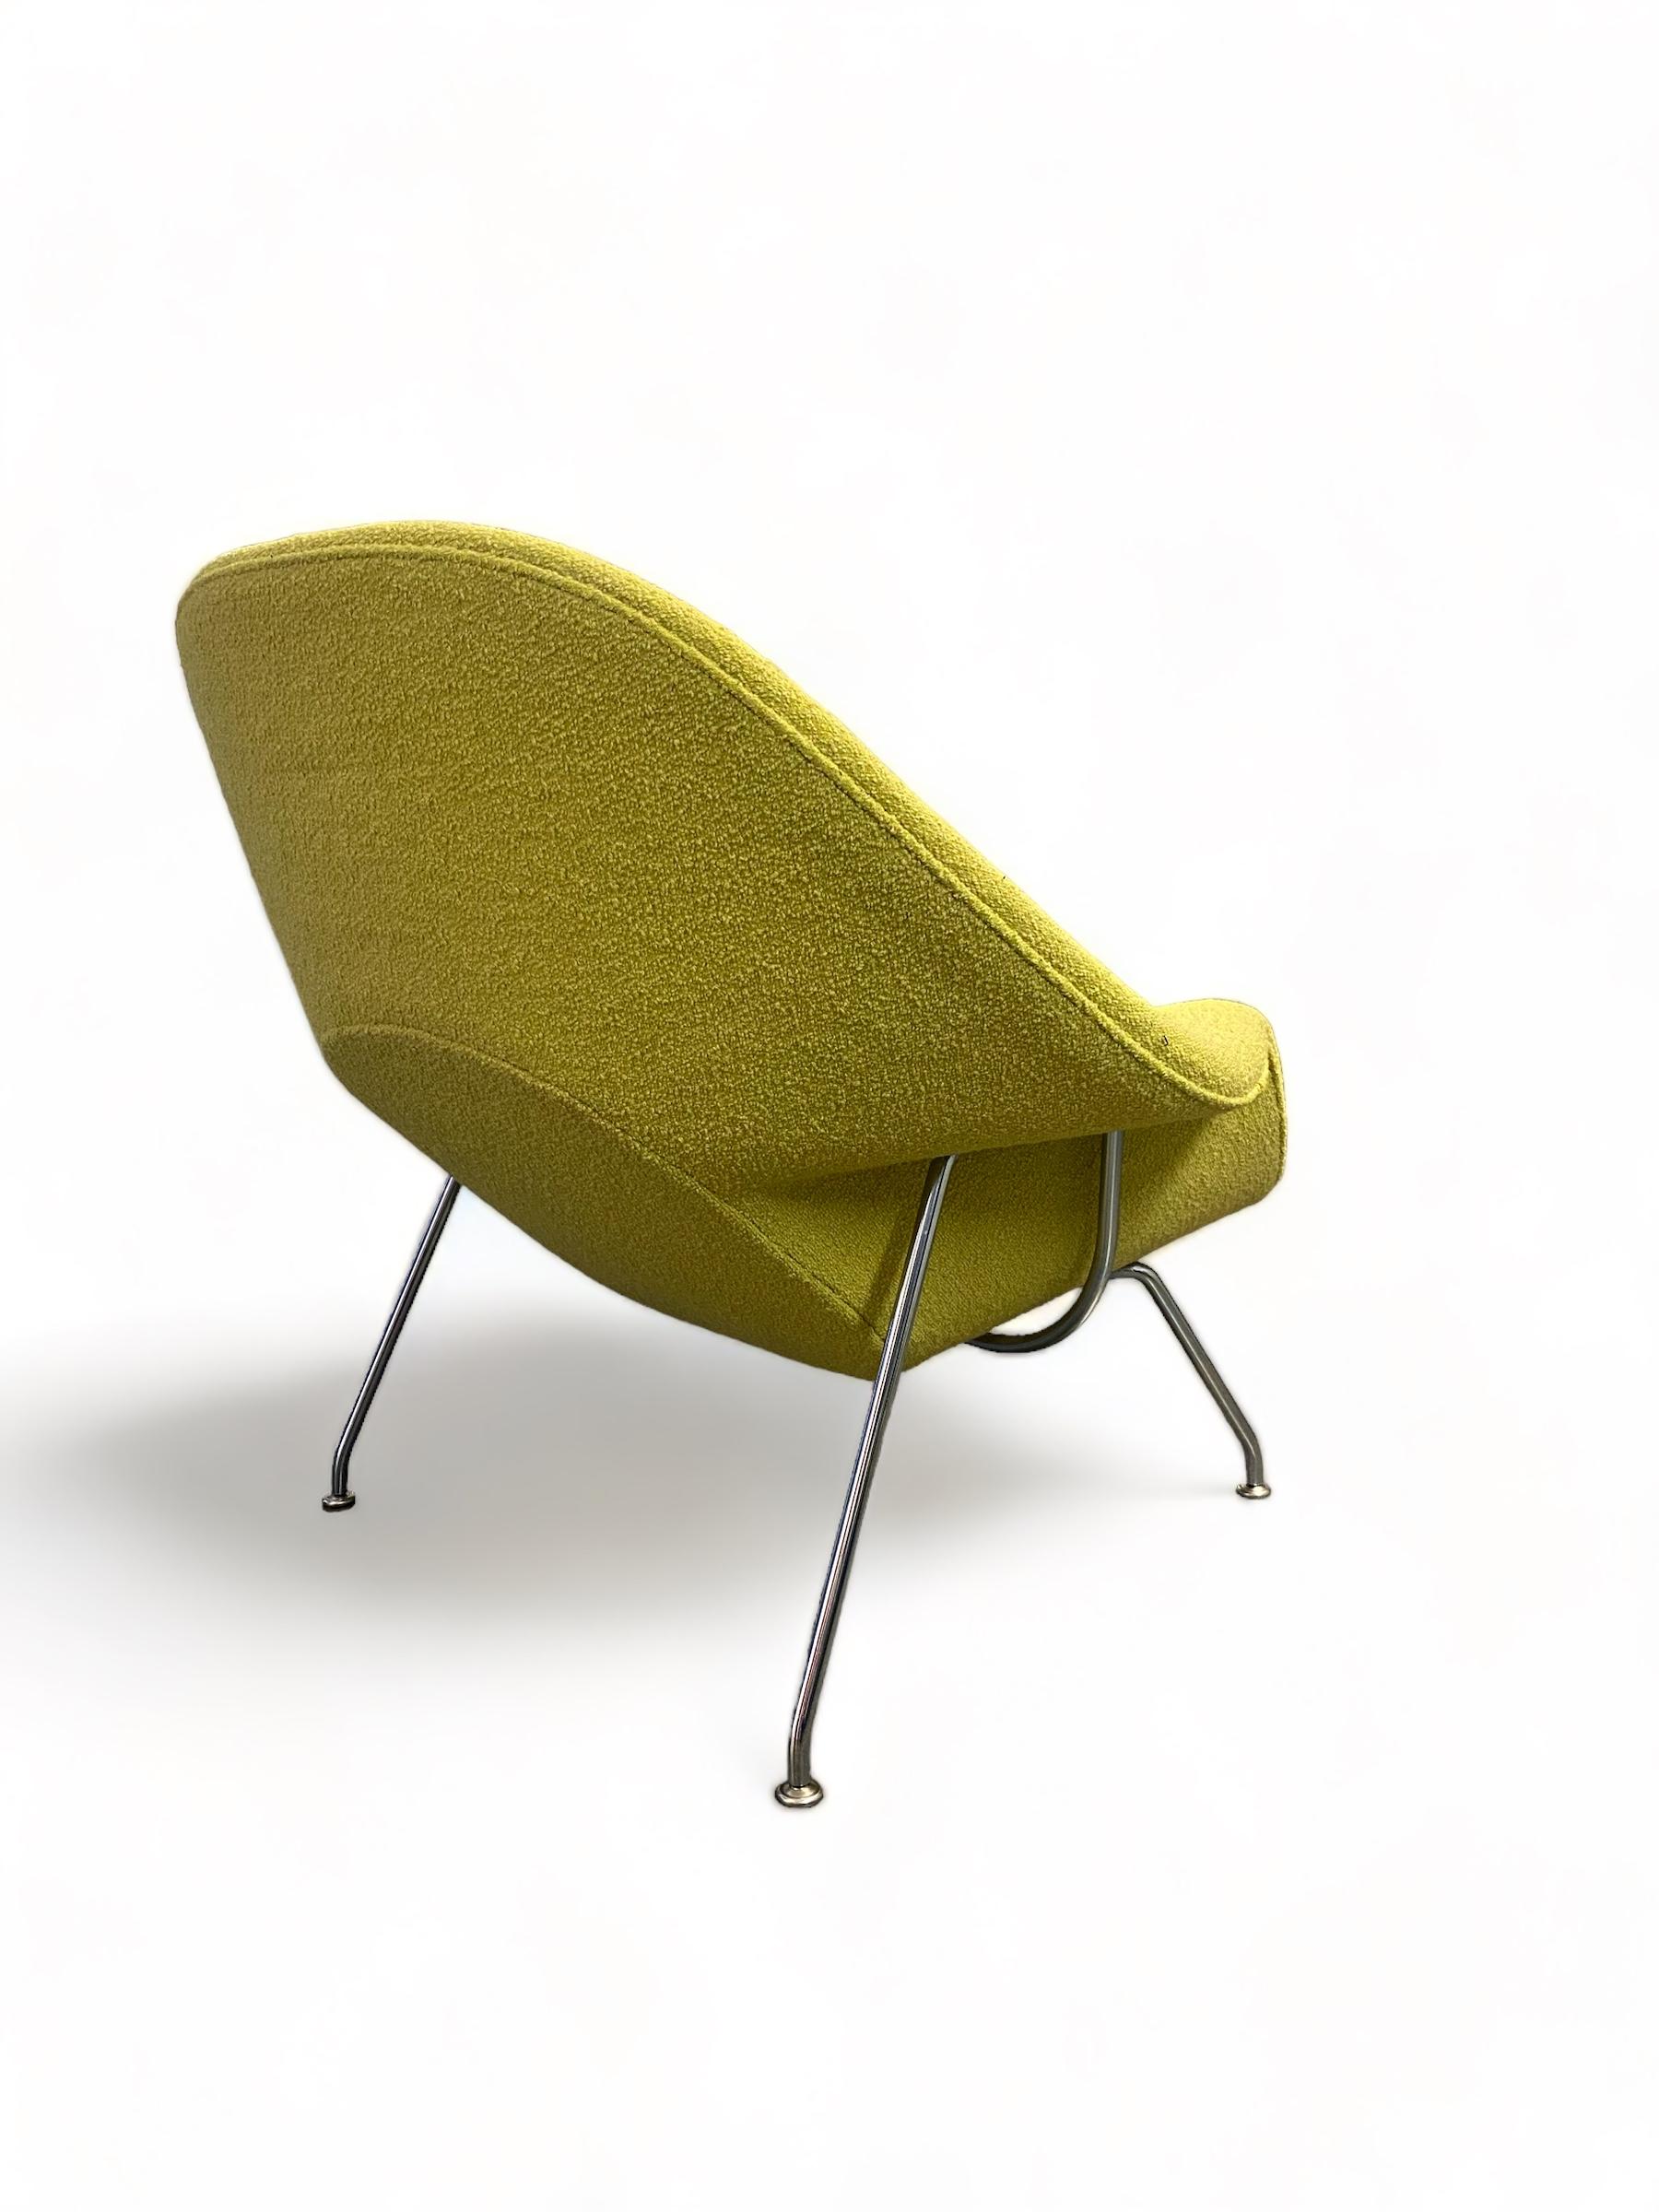 Contemporary Eero Saarinen Womb Chair and Ottoman for Knoll, Boucle